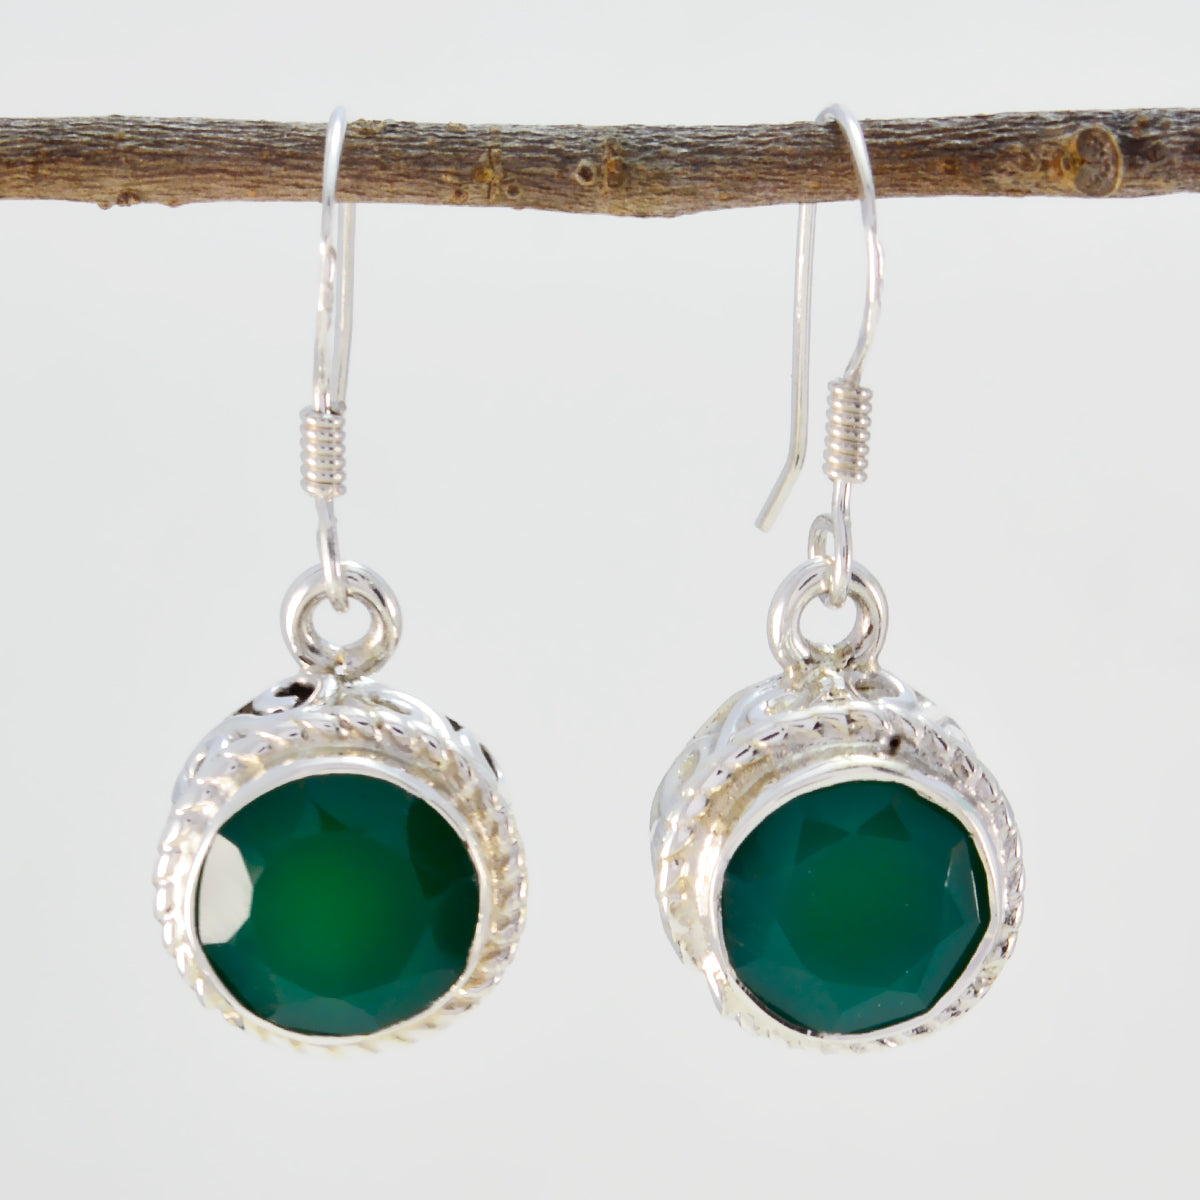 Riyo Nice Gemstone round Faceted Green Onyx Silver Earring gift for engagement